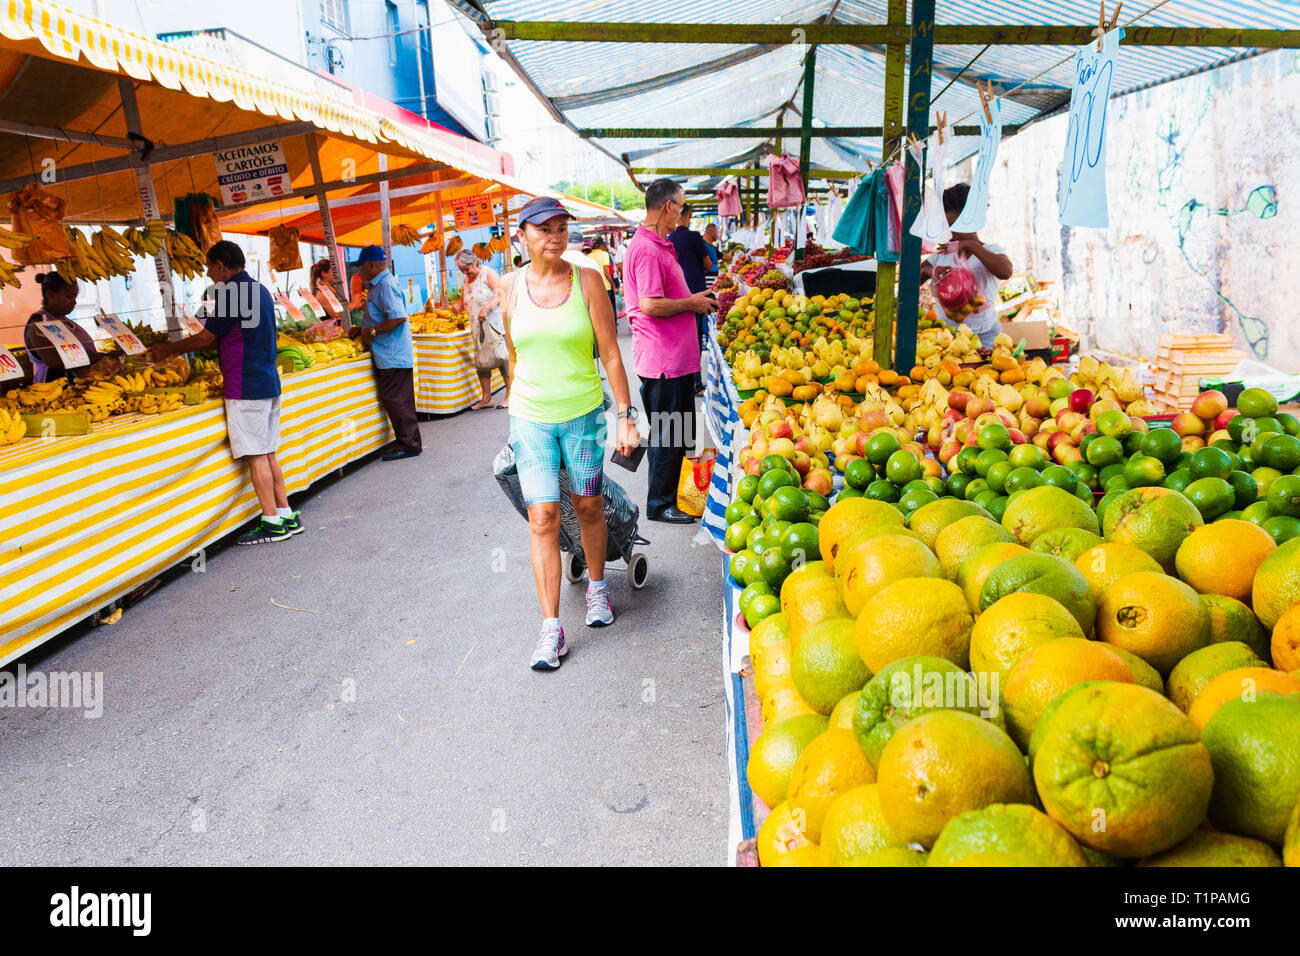 Taboão da Serra, SP / Brazil - 03/17/2019: An unidentified group of people at commerce, selling vegetables, fruits and food in the street fair. Stock Photo